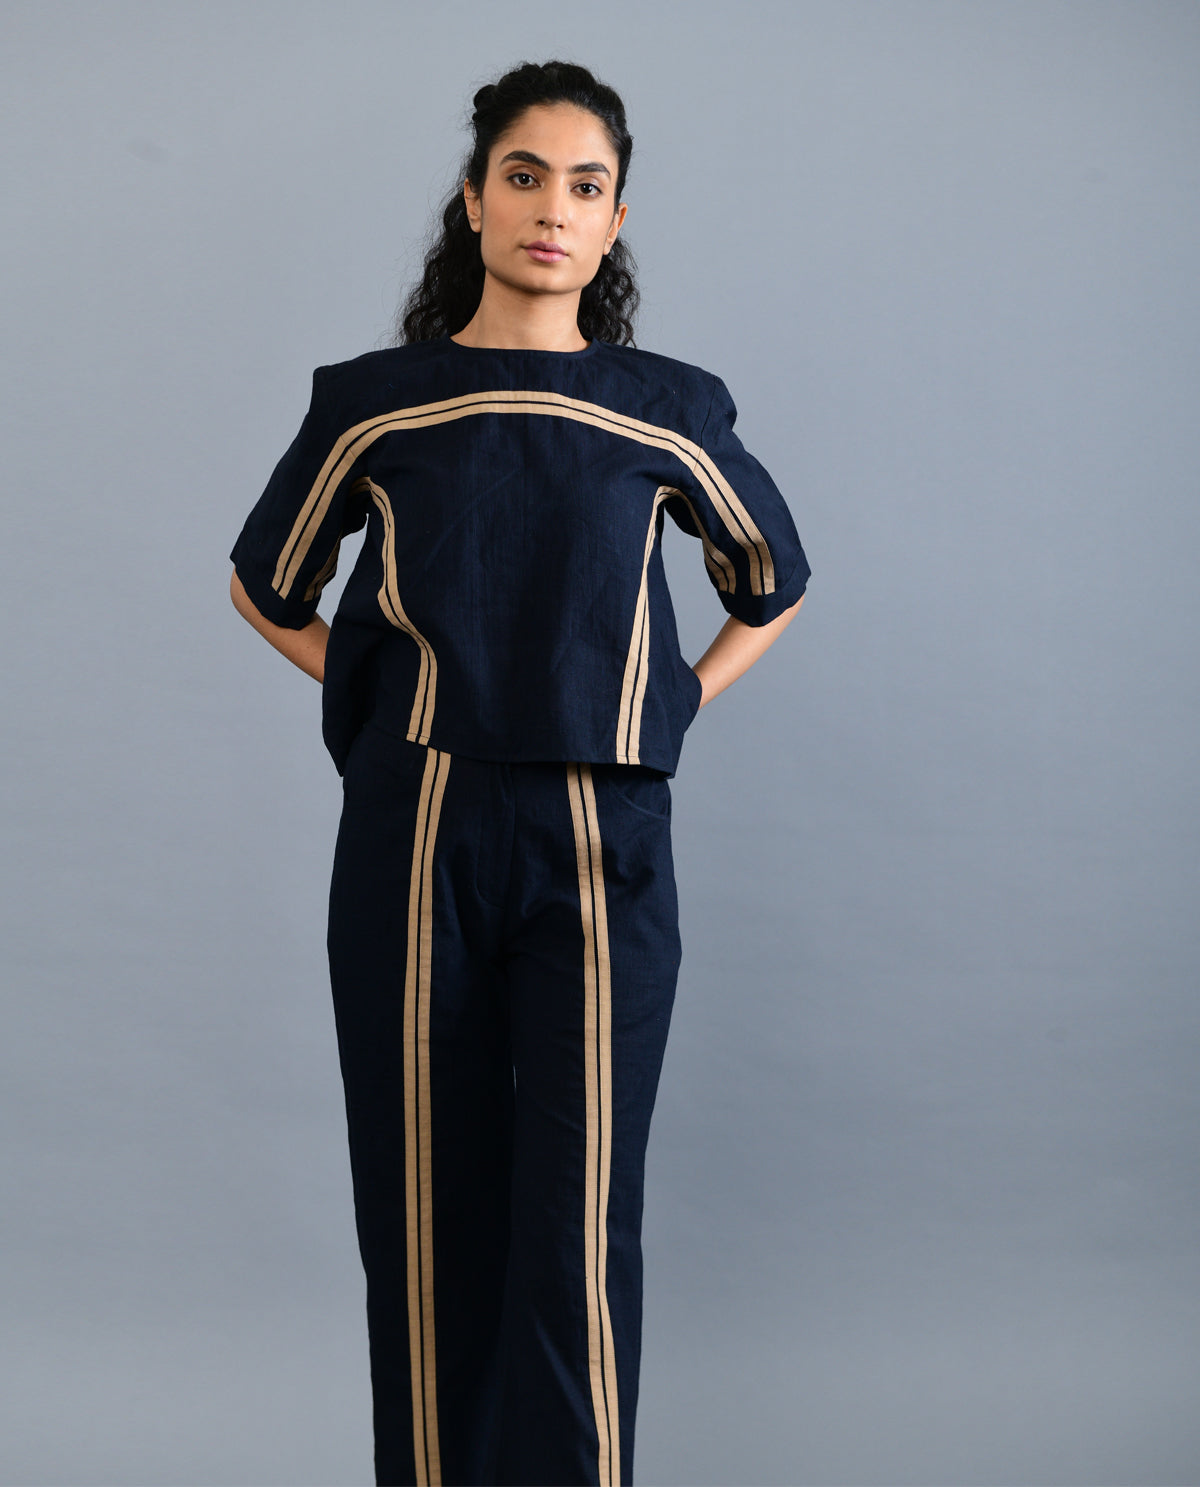 Black Solid Co-ord Set at Kamakhyaa by Rias Jaipur. This item is Black, Casual Wear, Co-ord Sets, Handloom Cotton, Handspun, Handwoven, Hue, Office, Office Wear Co-ords, Regular Fit, Solids, Stripes, Womenswear